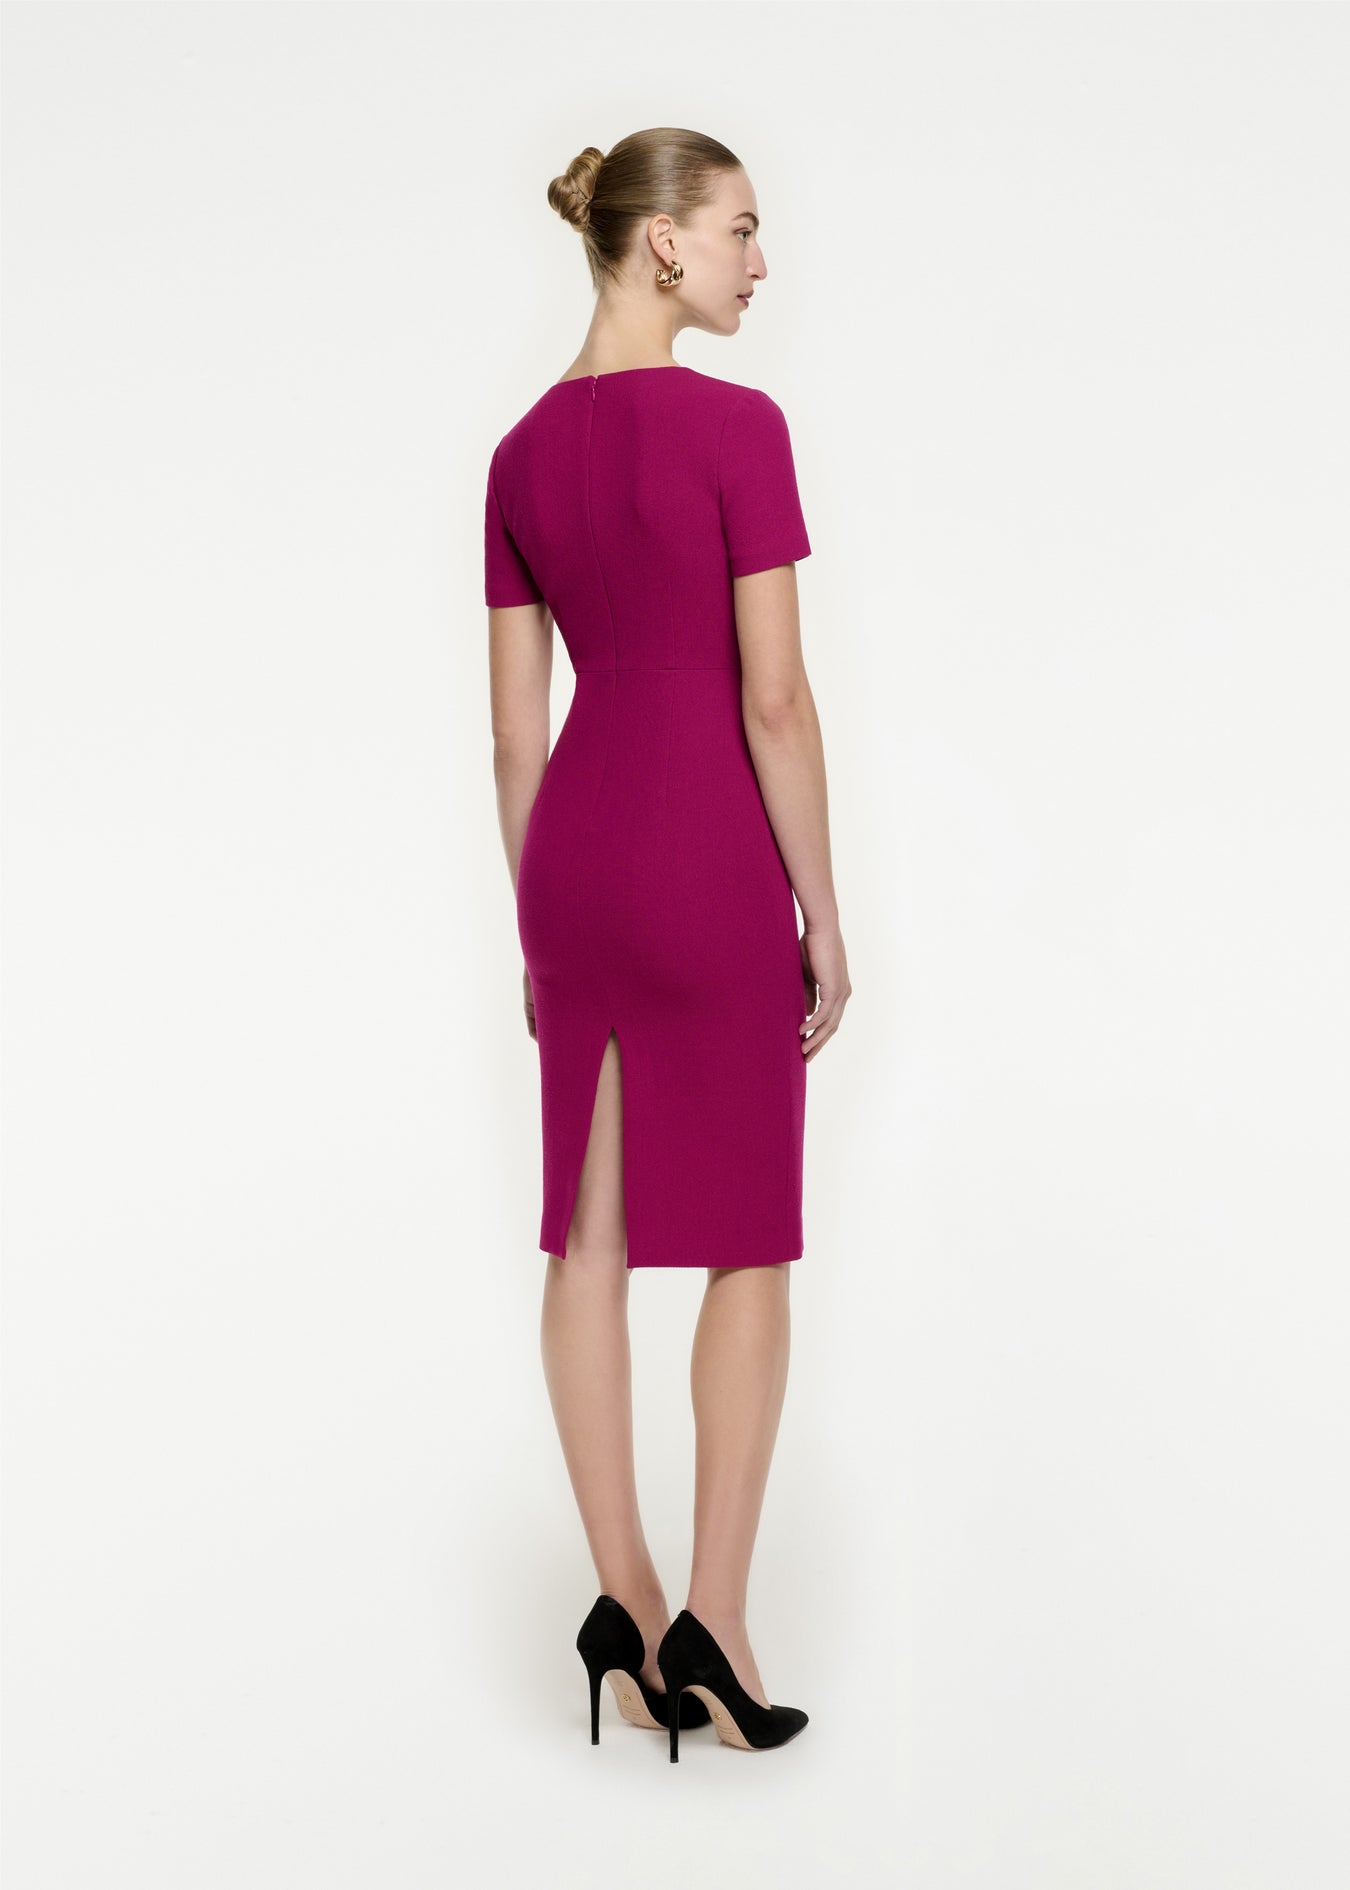 The back of a woman wearing the Short Sleeve Wool Crepe Midi Dress in Purple